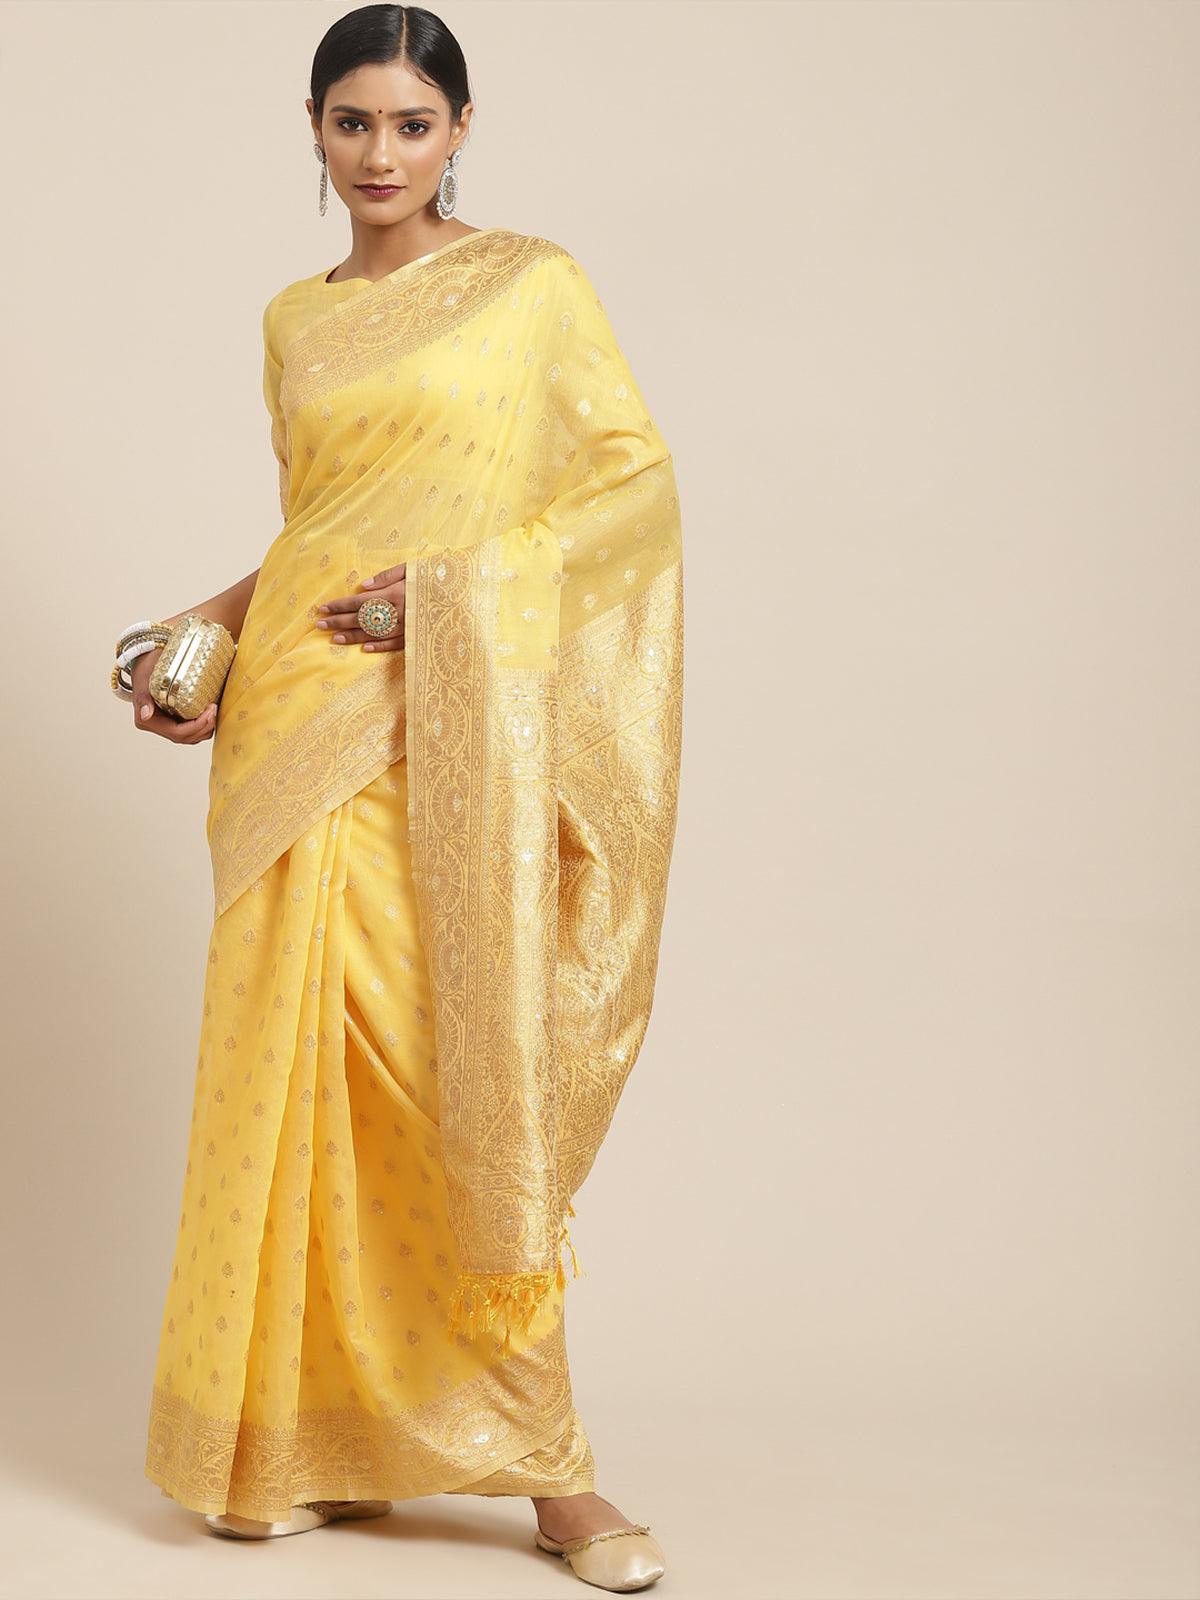 Women's Silk Cotton Yellow Woven Design Woven saree With Blouse Piece - Odette